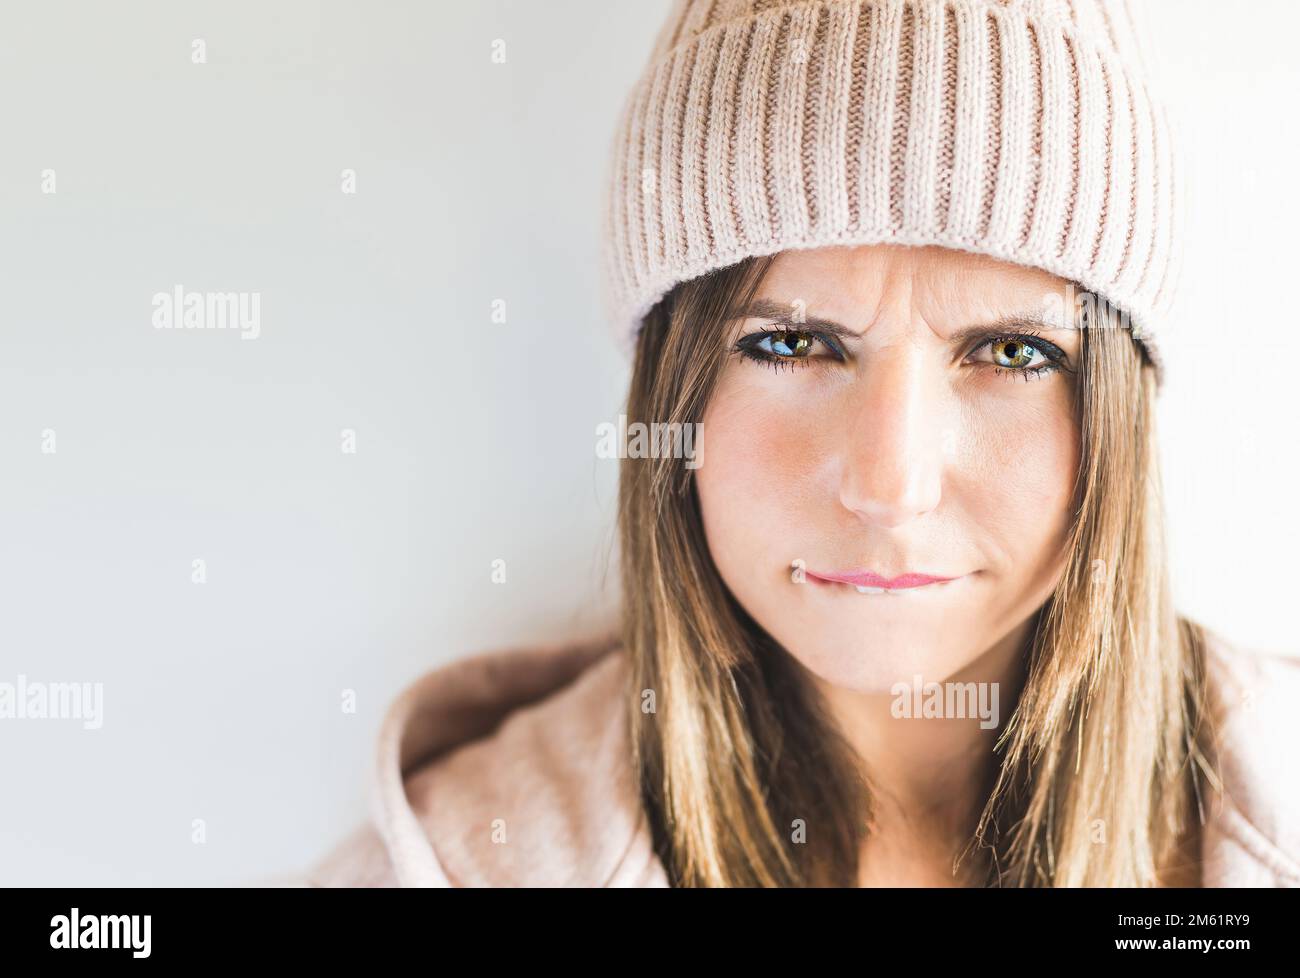 Close-up of a Caucasian woman wearing a cap, looking with an angry expression. Angry concept Stock Photo